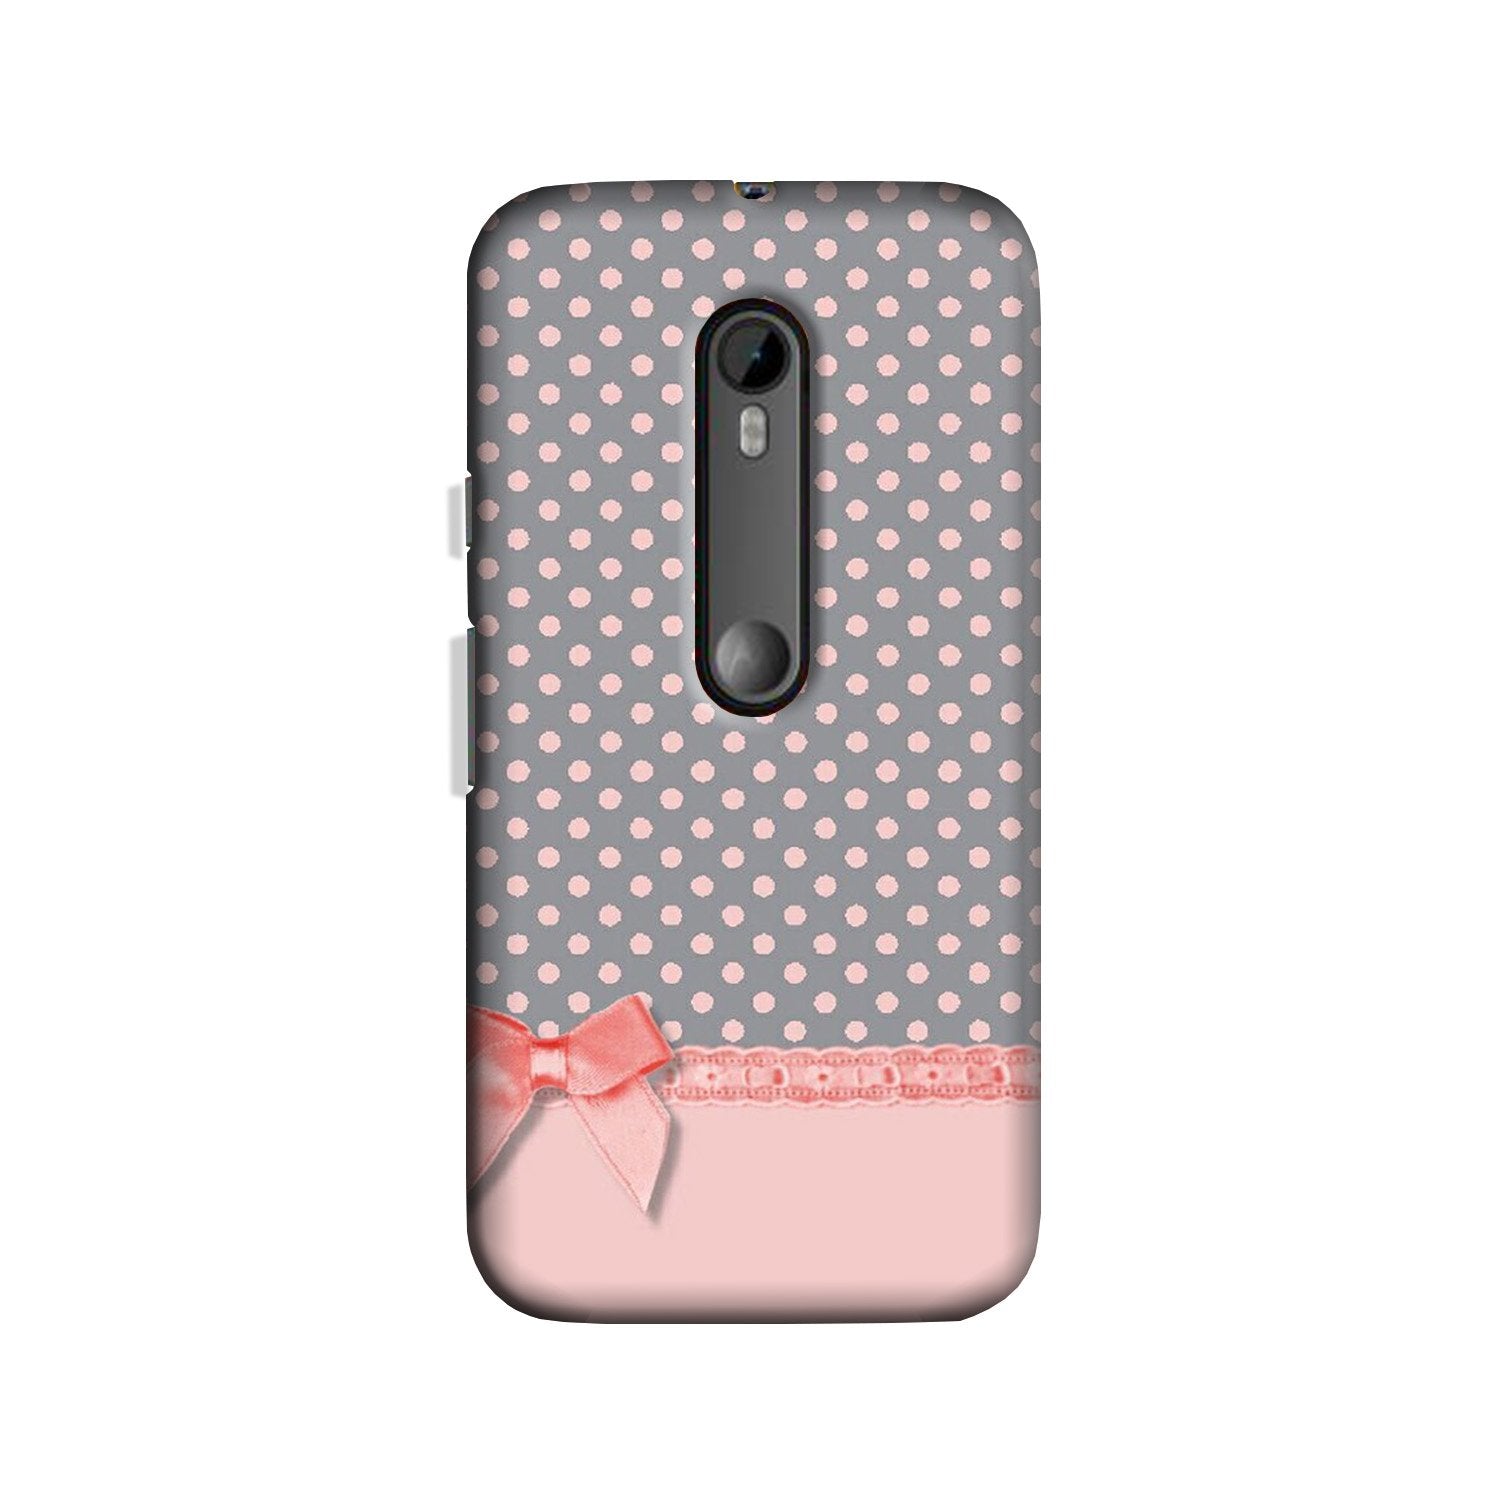 Gift Wrap2 Case for Moto X Style